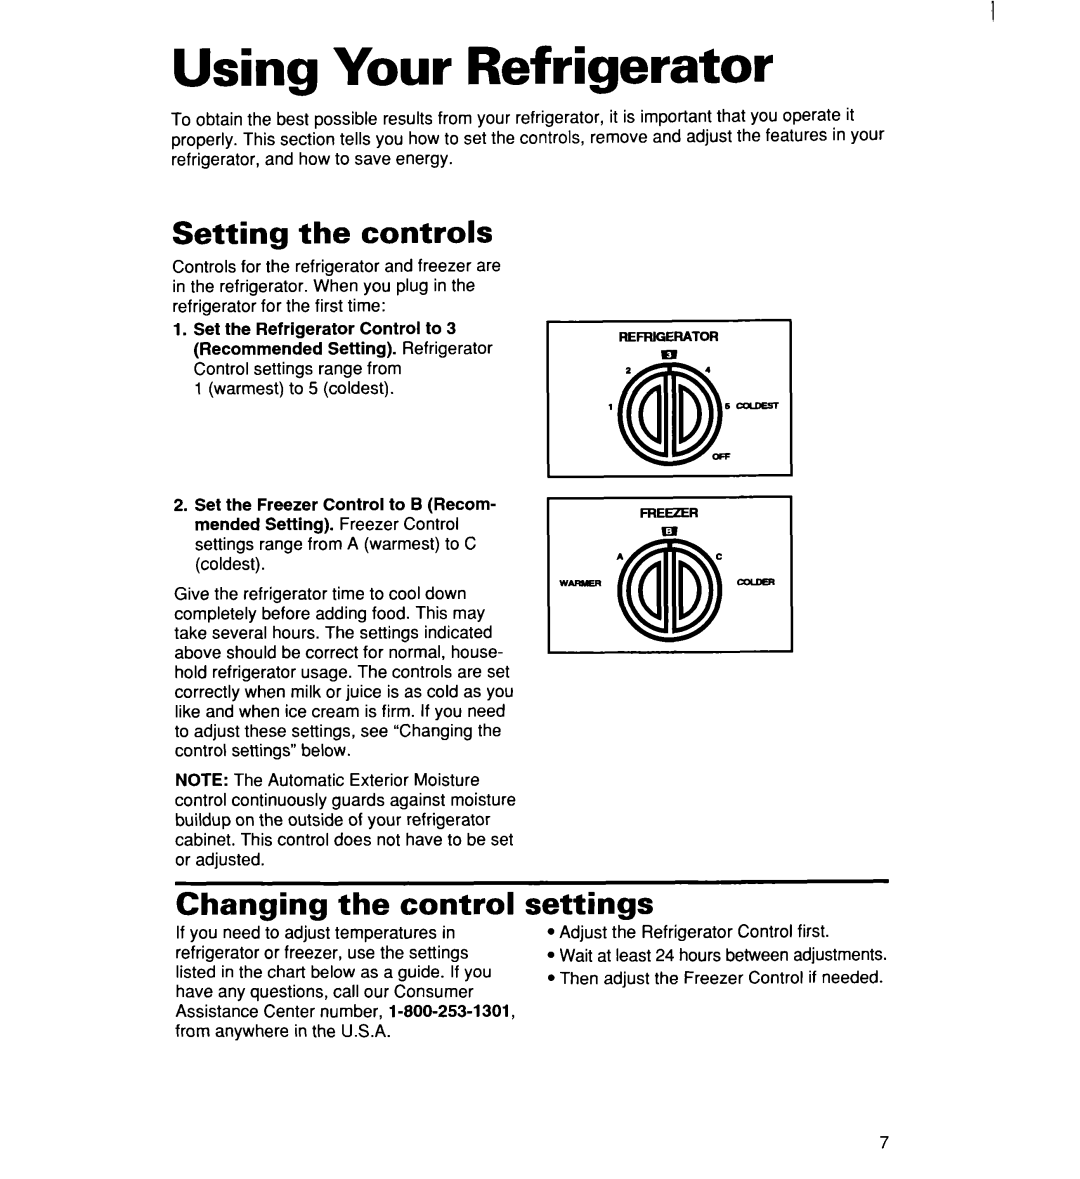 Whirlpool 2194182 warranty Using Your Refrigerator, Setting the controls, Changing the control, settings, W-Cid 